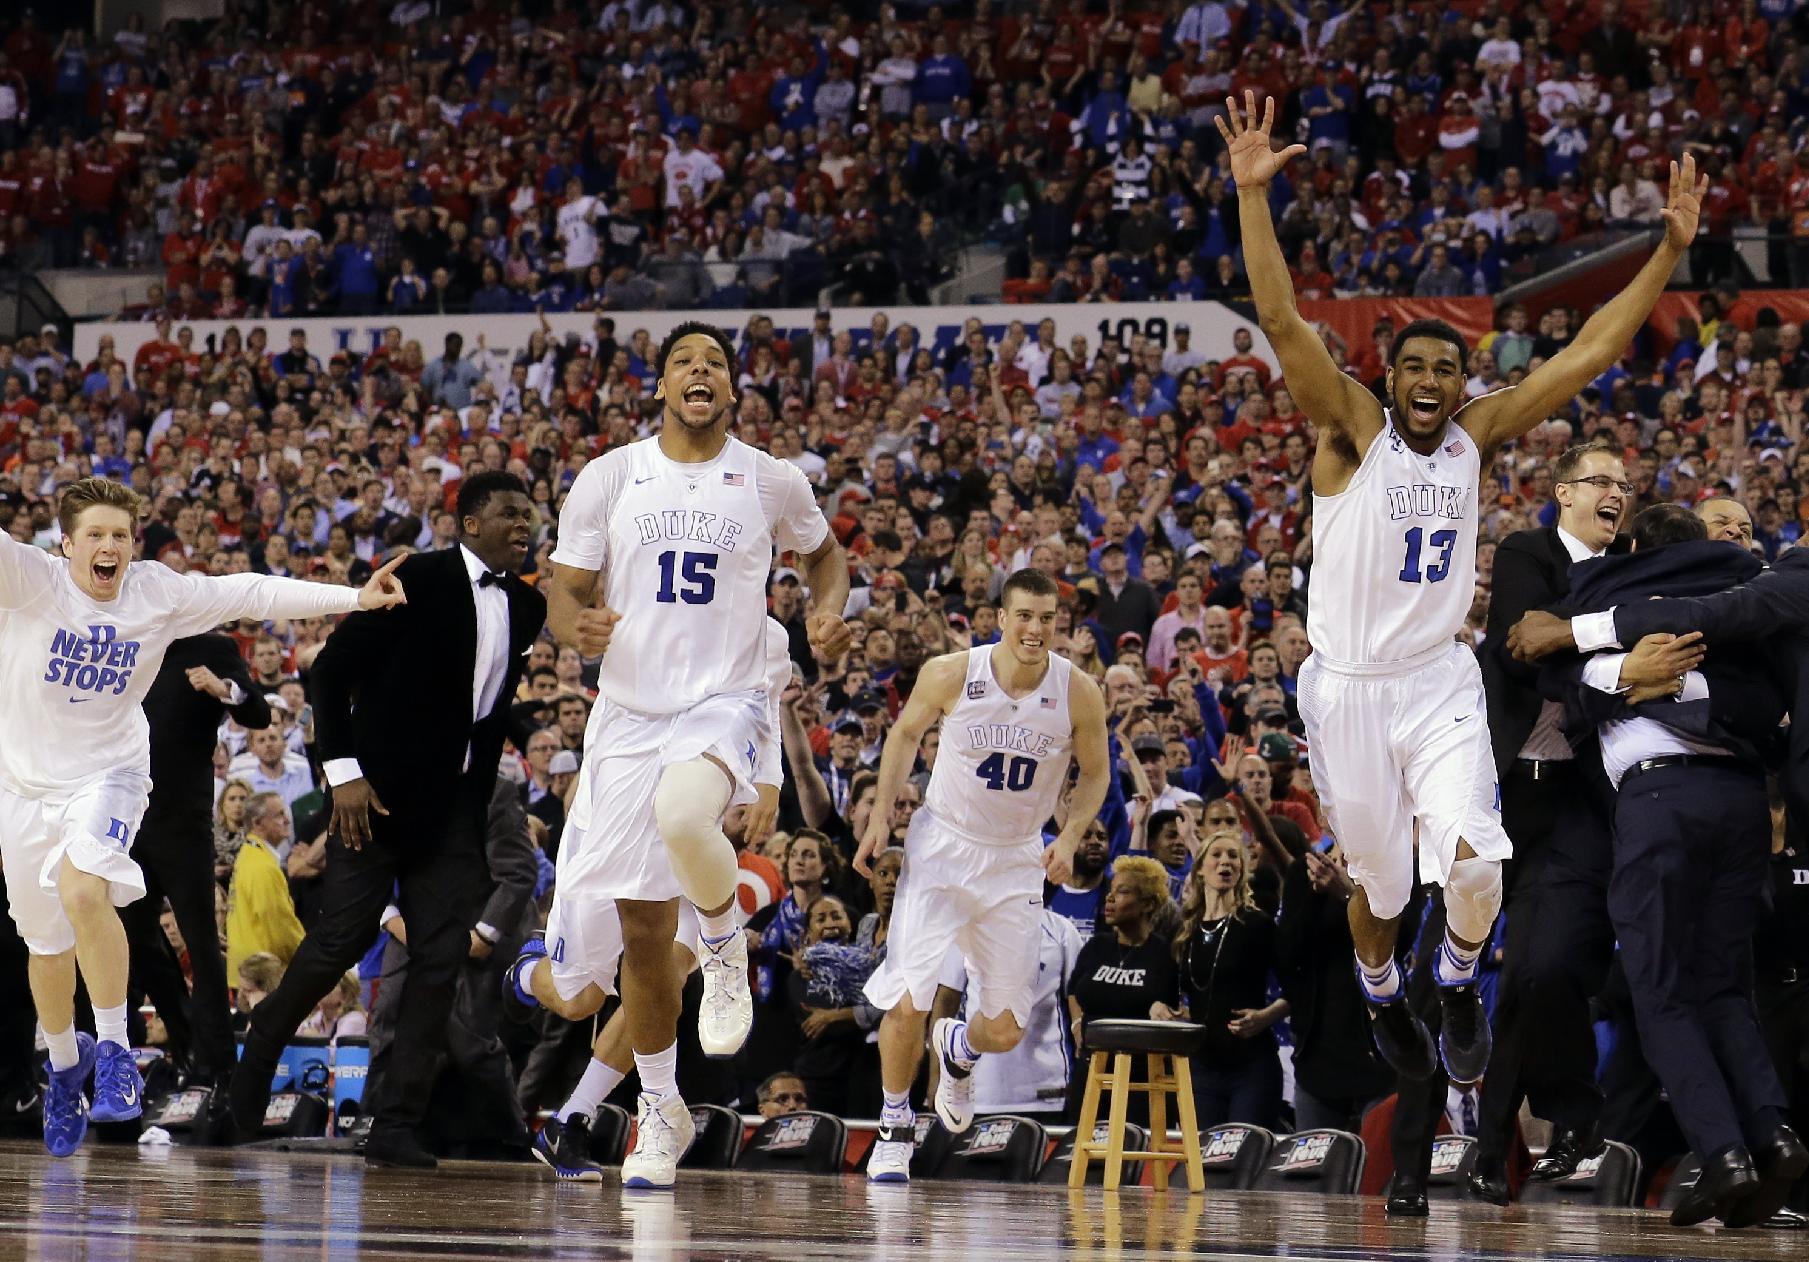 Duke players celebrate after the NCAA Final Four college basketball tournament championship game. (AP)